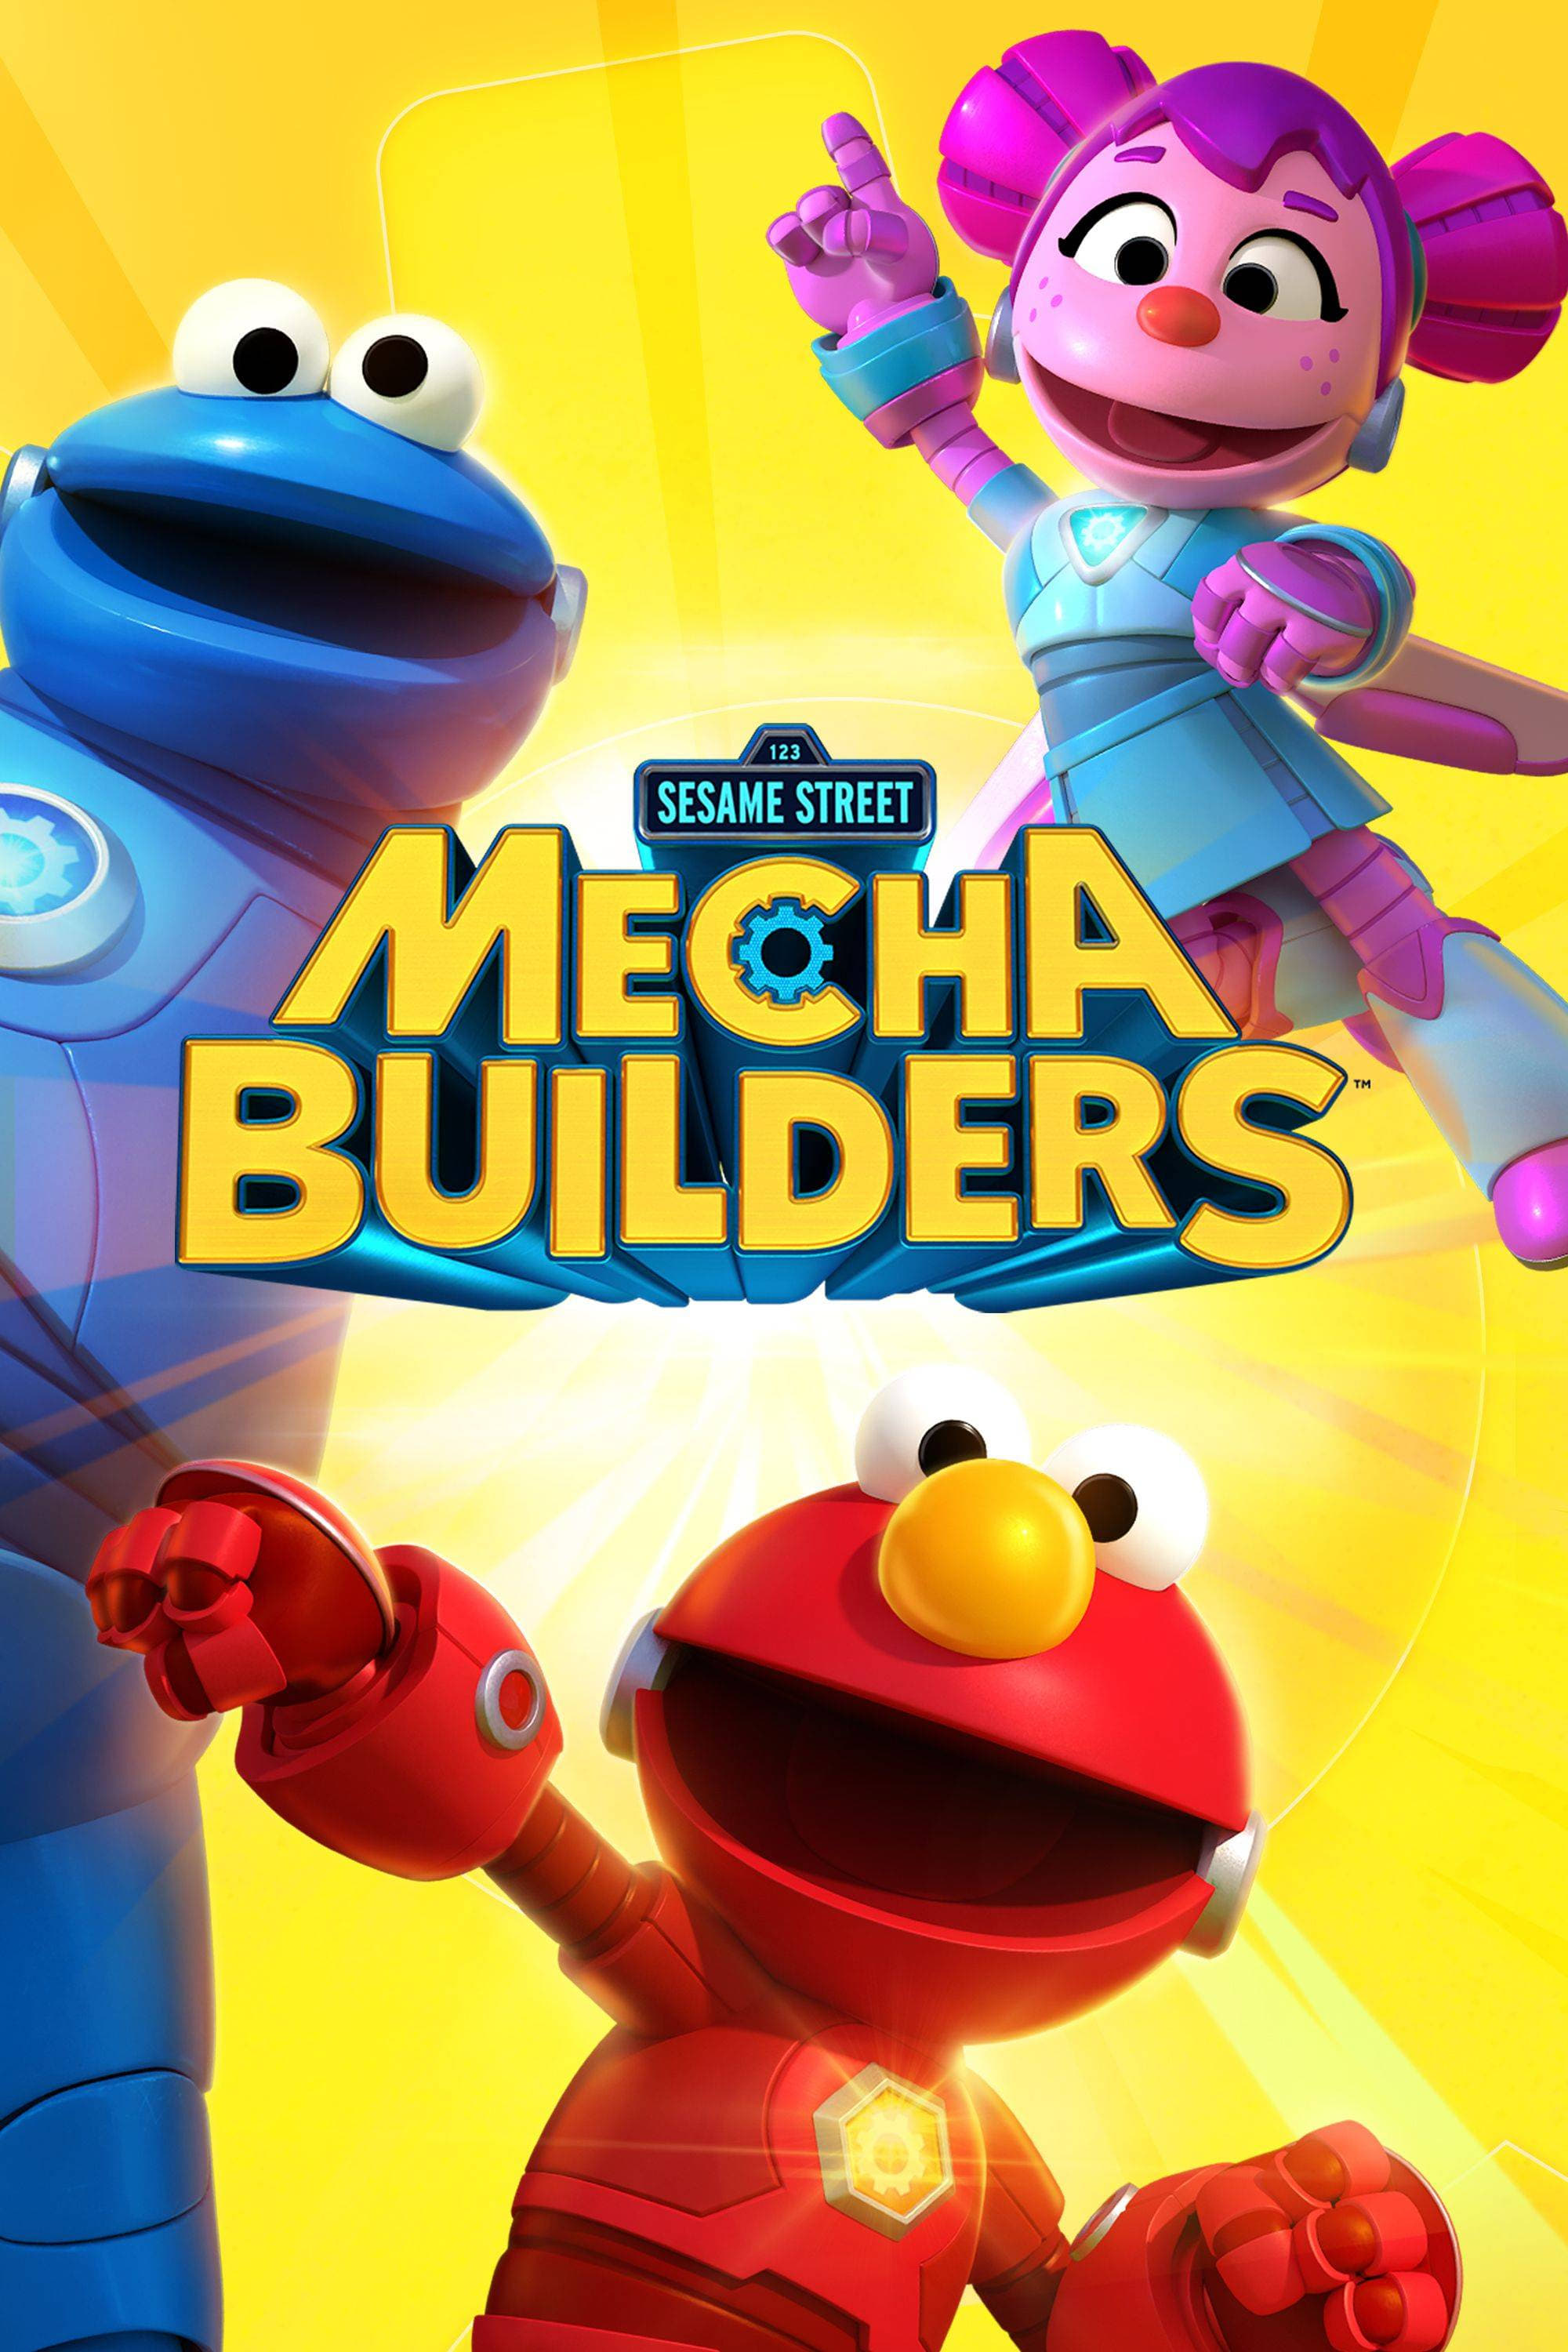 Mecha Builders TV Shows About Robot